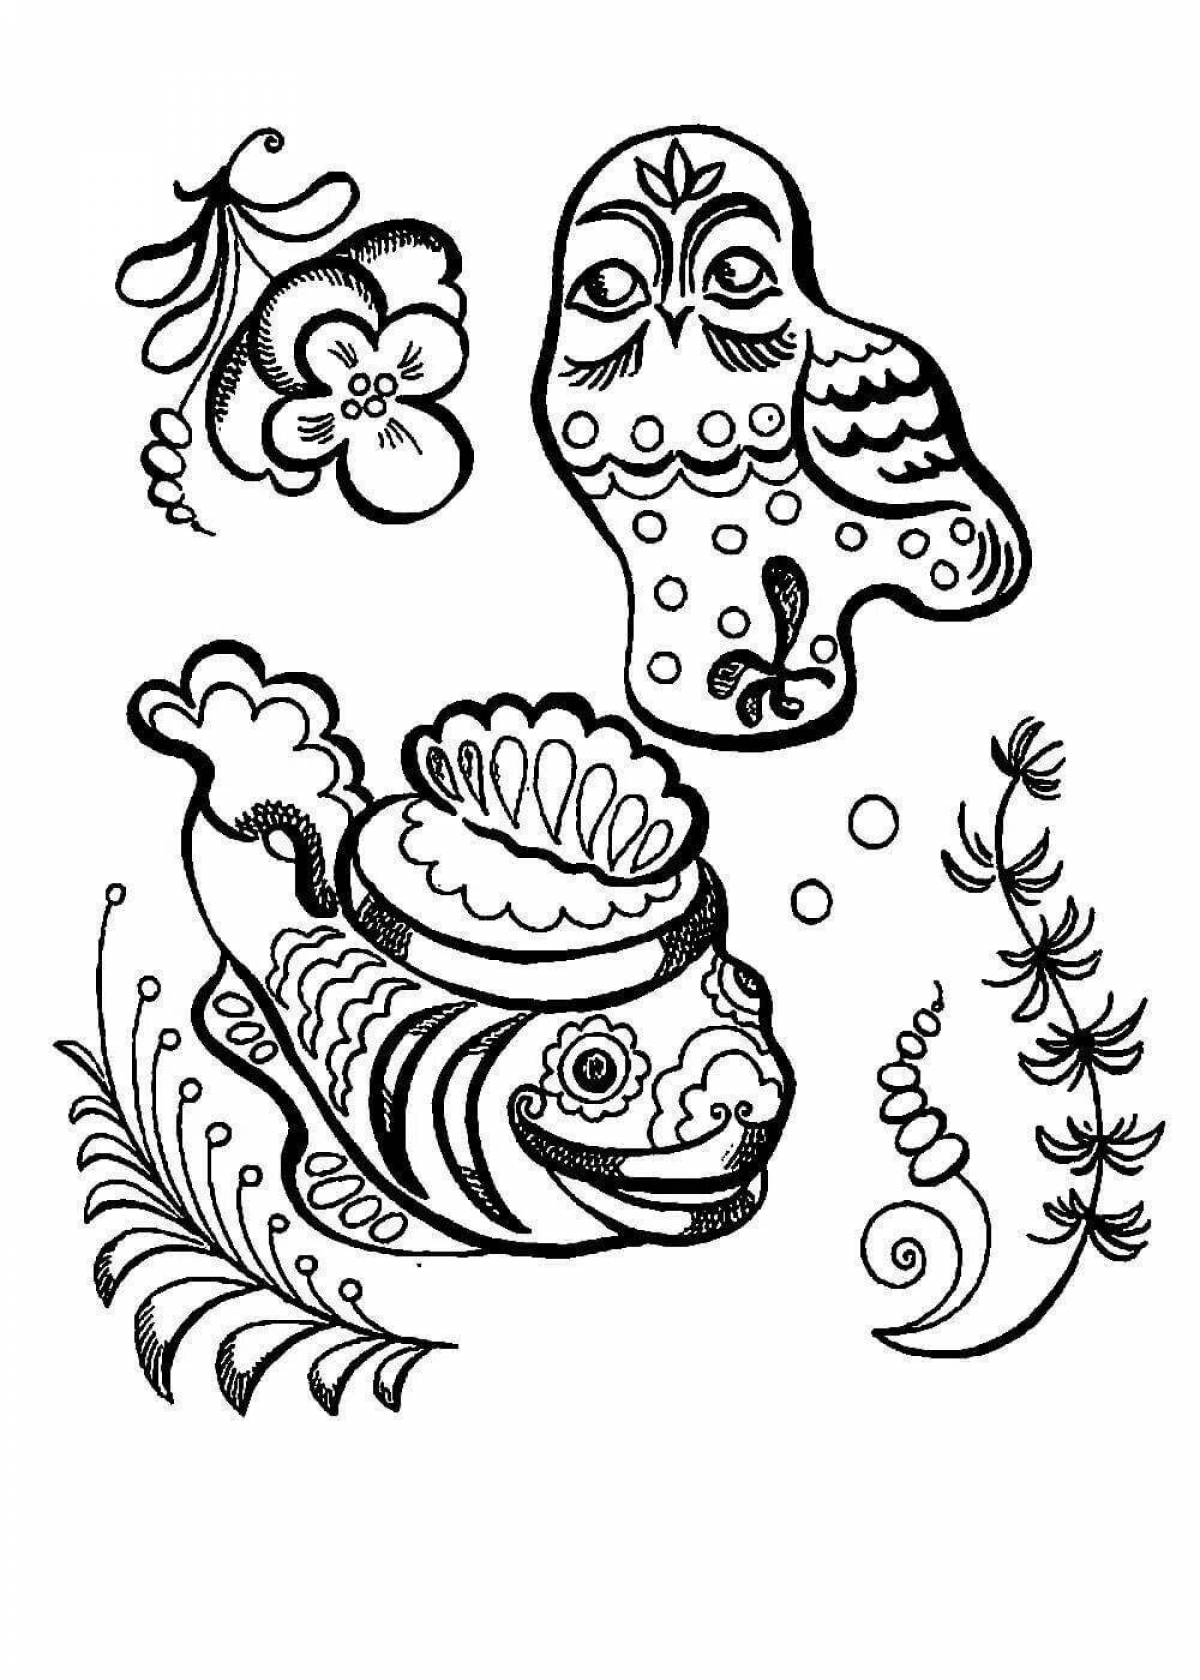 Coloring page charming folk painting